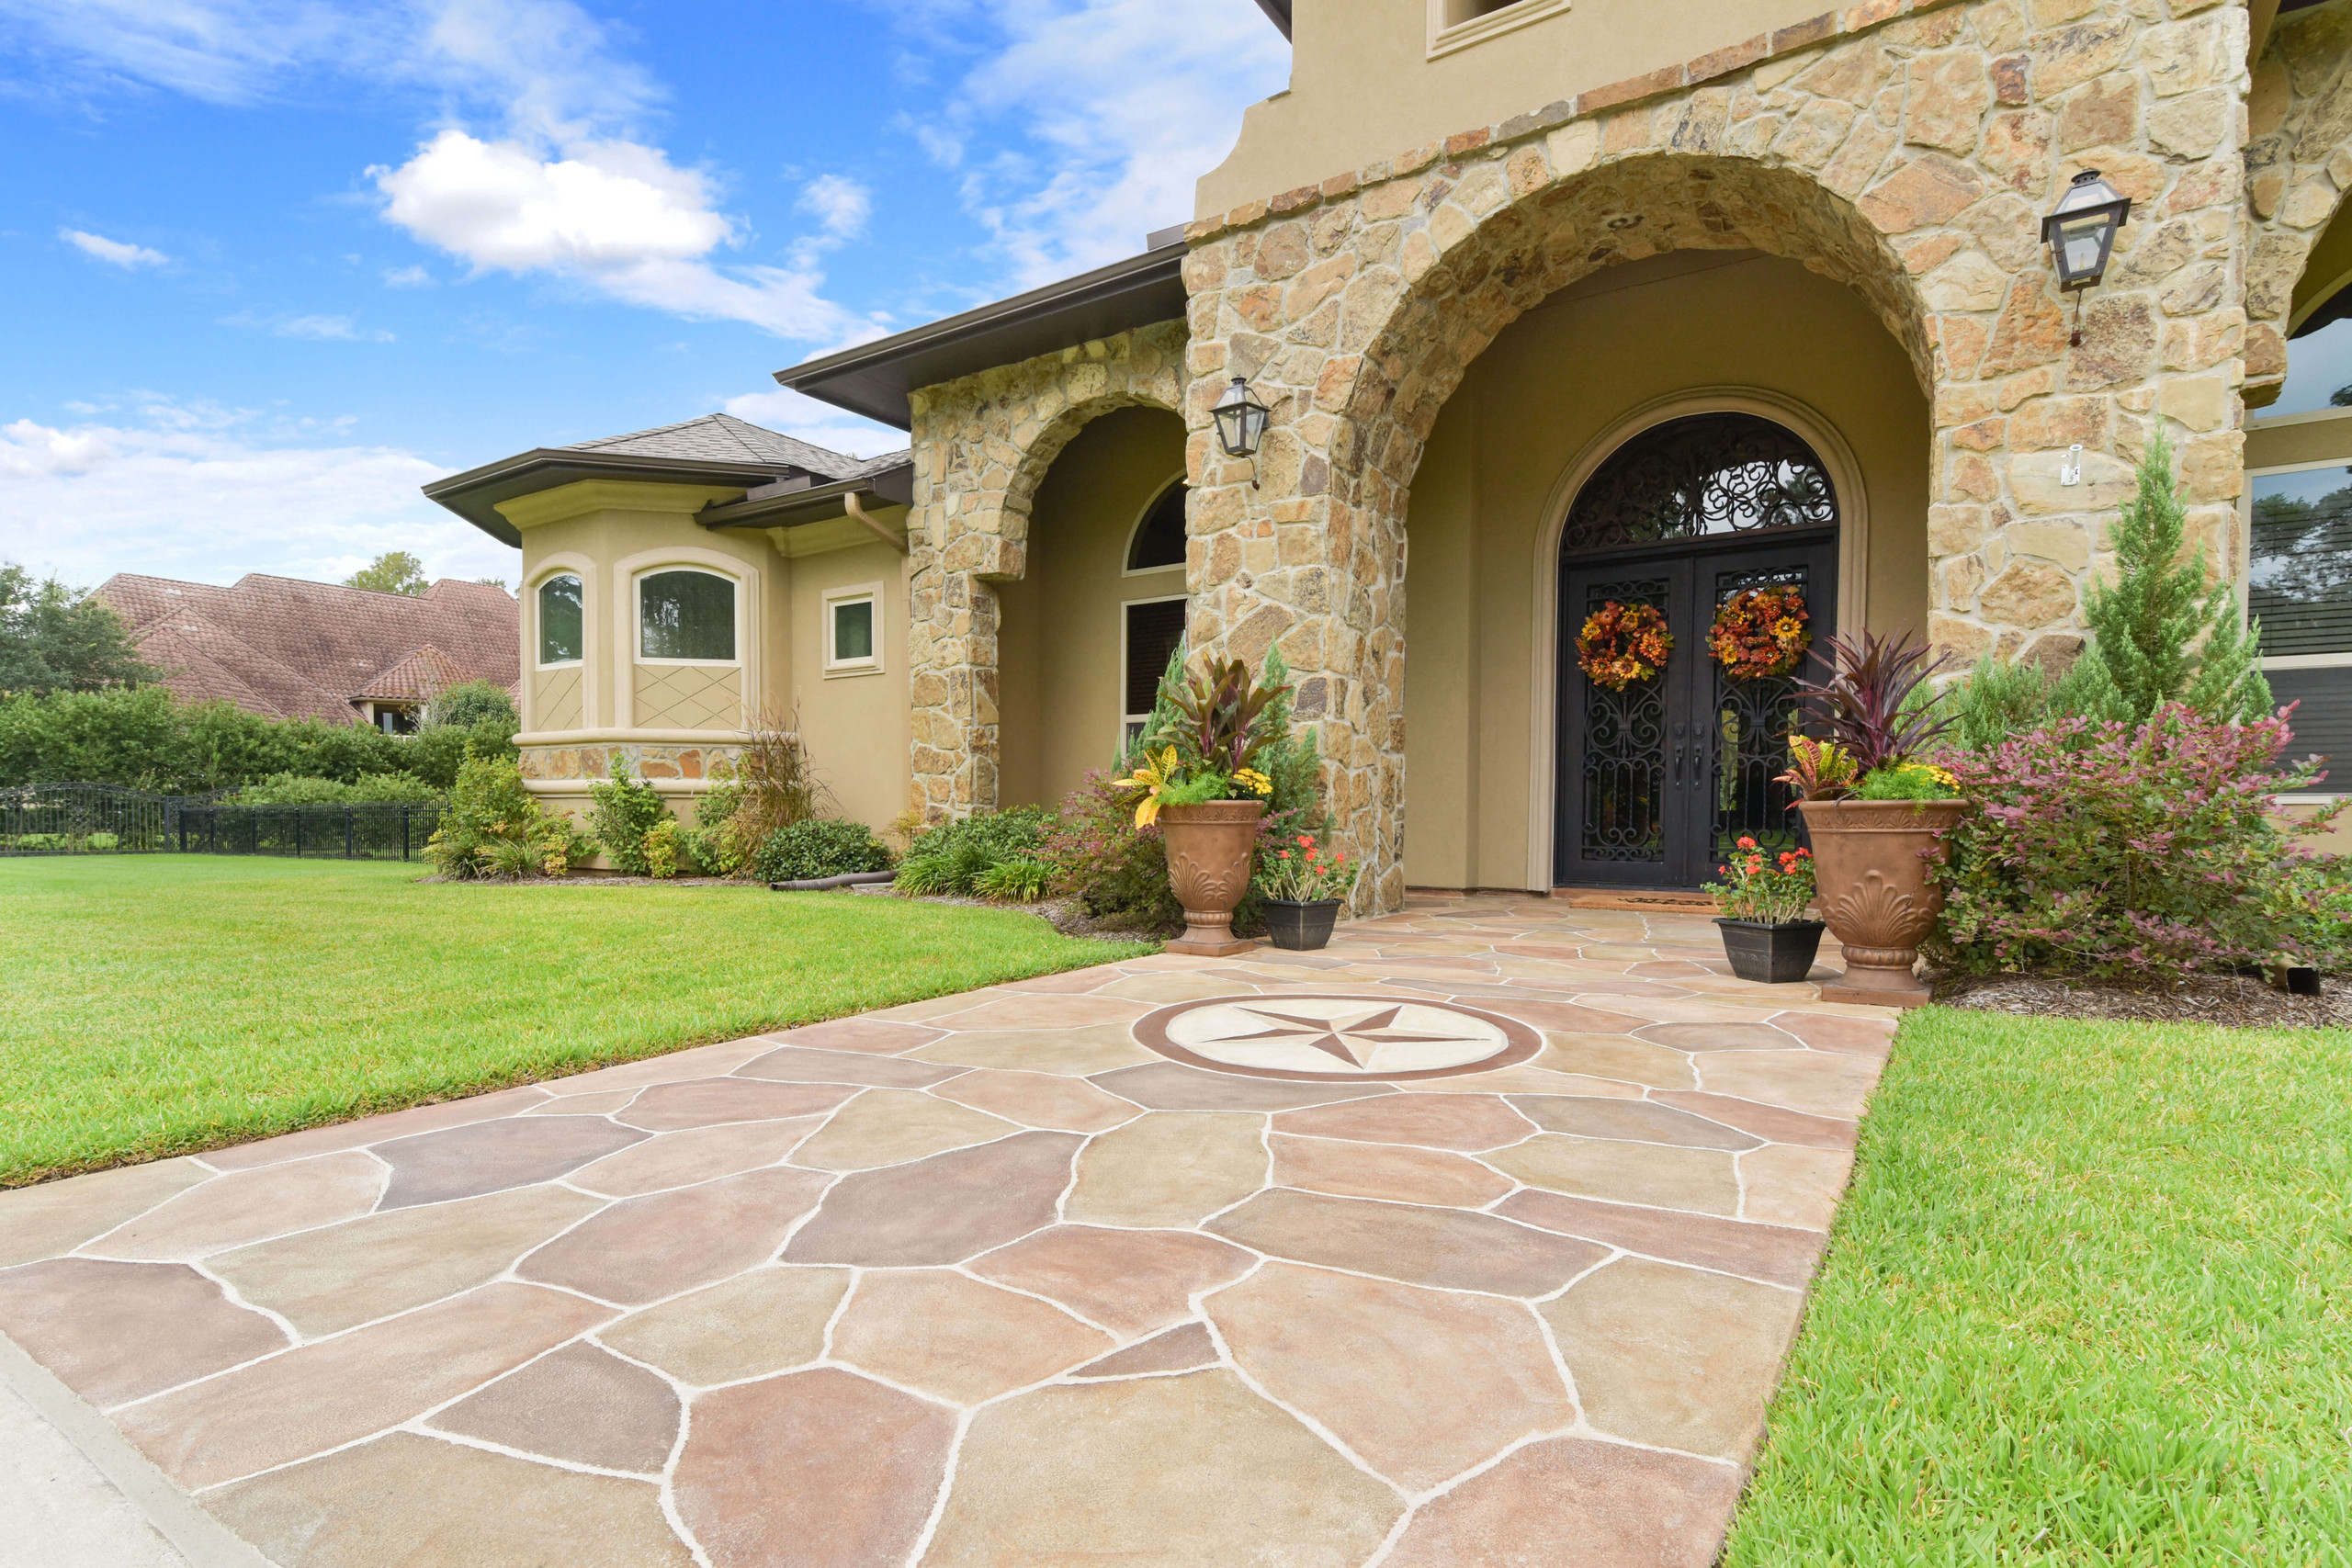 Carvestone walkway in Texas hand-troweled and custom built hardscape